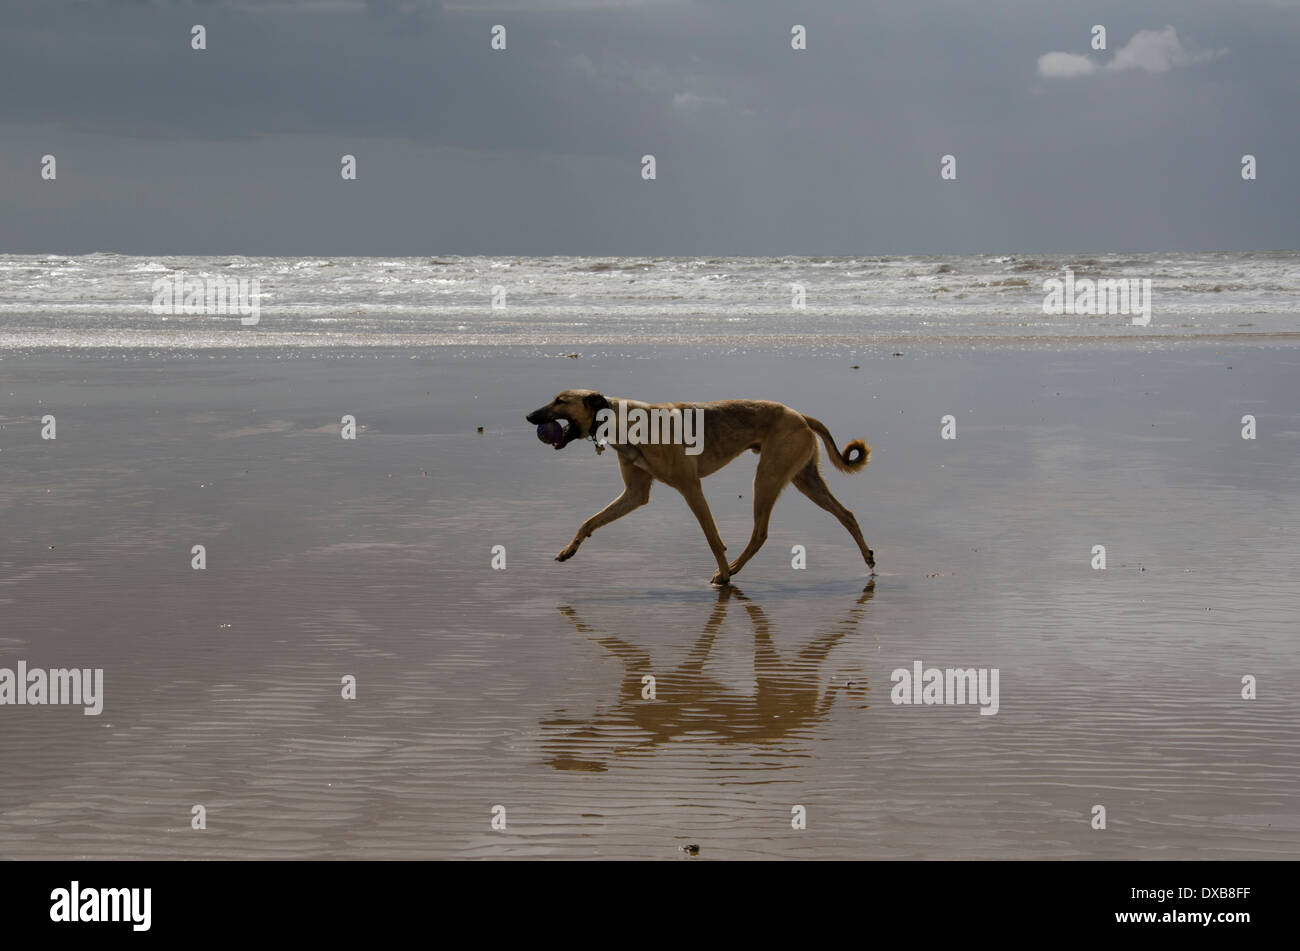 A dog on a beach, carrying a ball at low tide on a wet cloudy day at Drigg, Cumbria, England Stock Photo